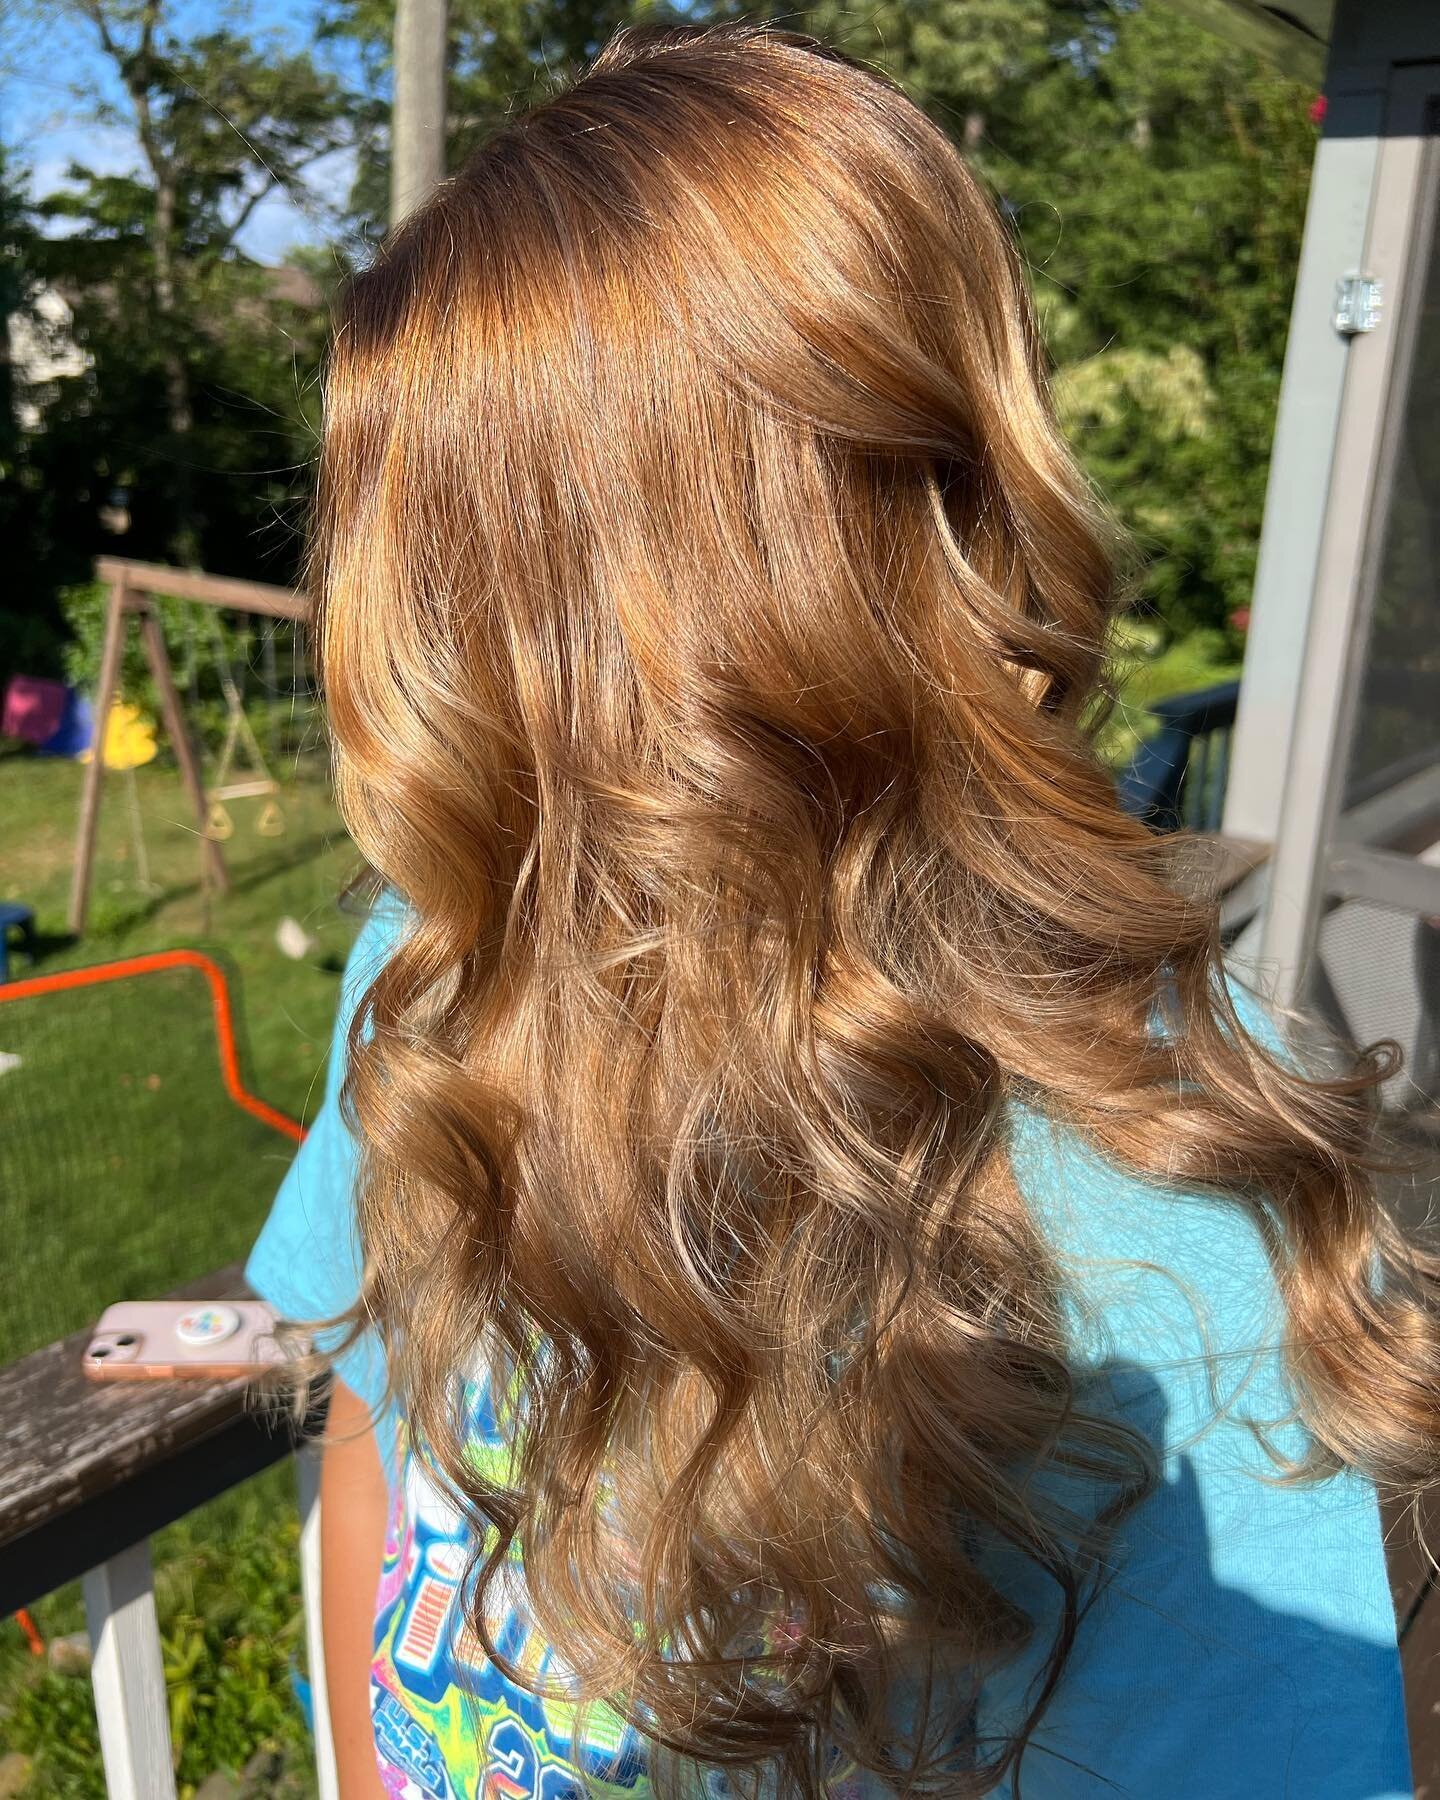 Beautiful blonde ✨ 

shout out to my girl @mdt.soph for trusting me with her hair and doing this beautiful blonde 

#templeannapolis #backtoschool #blonde #haircolor #annapolis #paulmitchell #blondebalayage